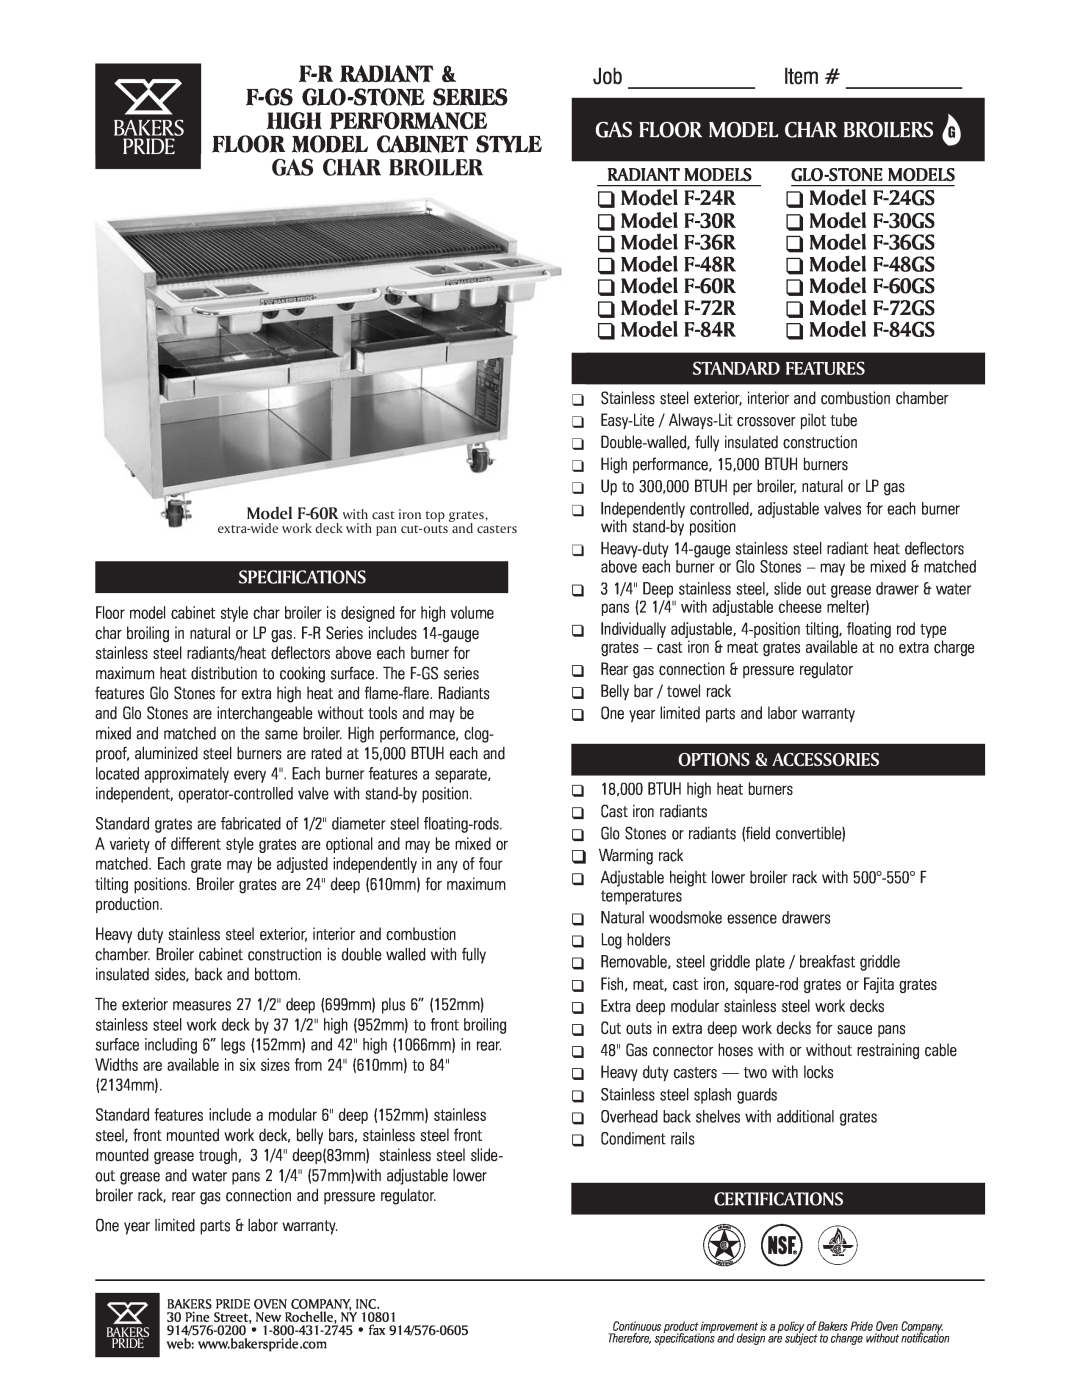 Bakers Pride Oven F-60R specifications F-Rradiant, Gas Floor Model Char Broilers G 